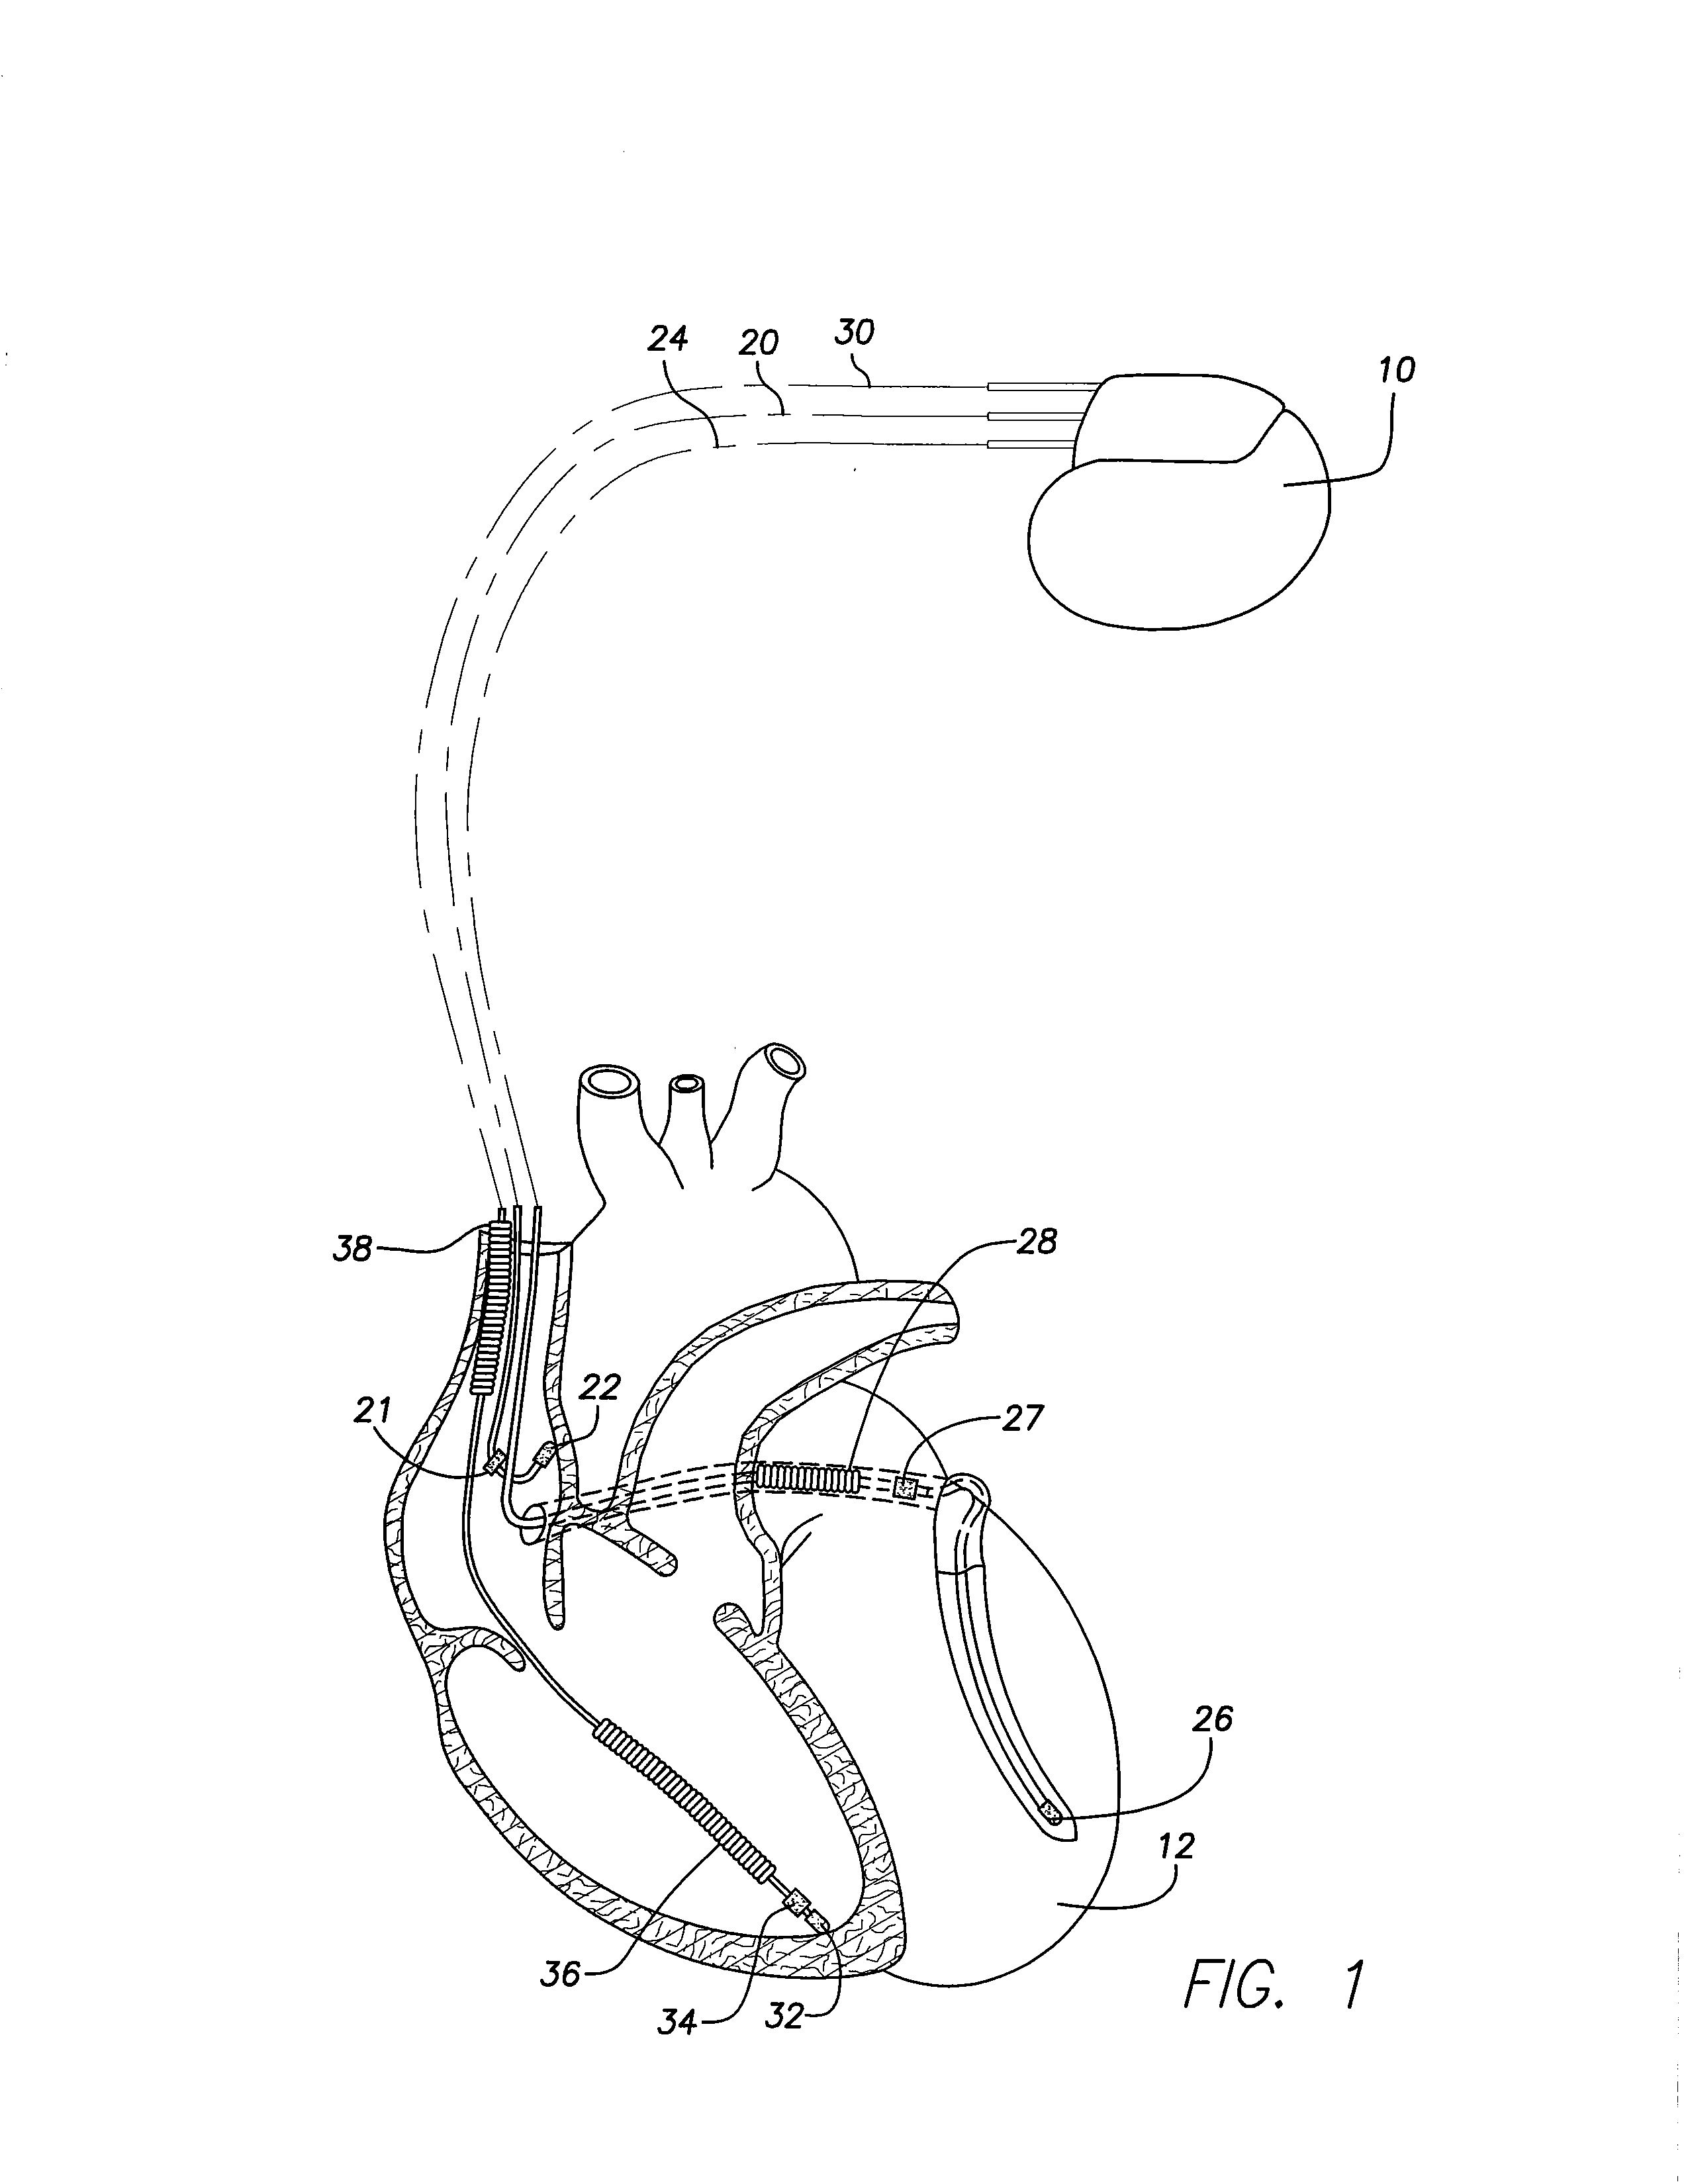 Implantable cardiac device providing intrinsic conduction search with premature atrial contraction protection and method